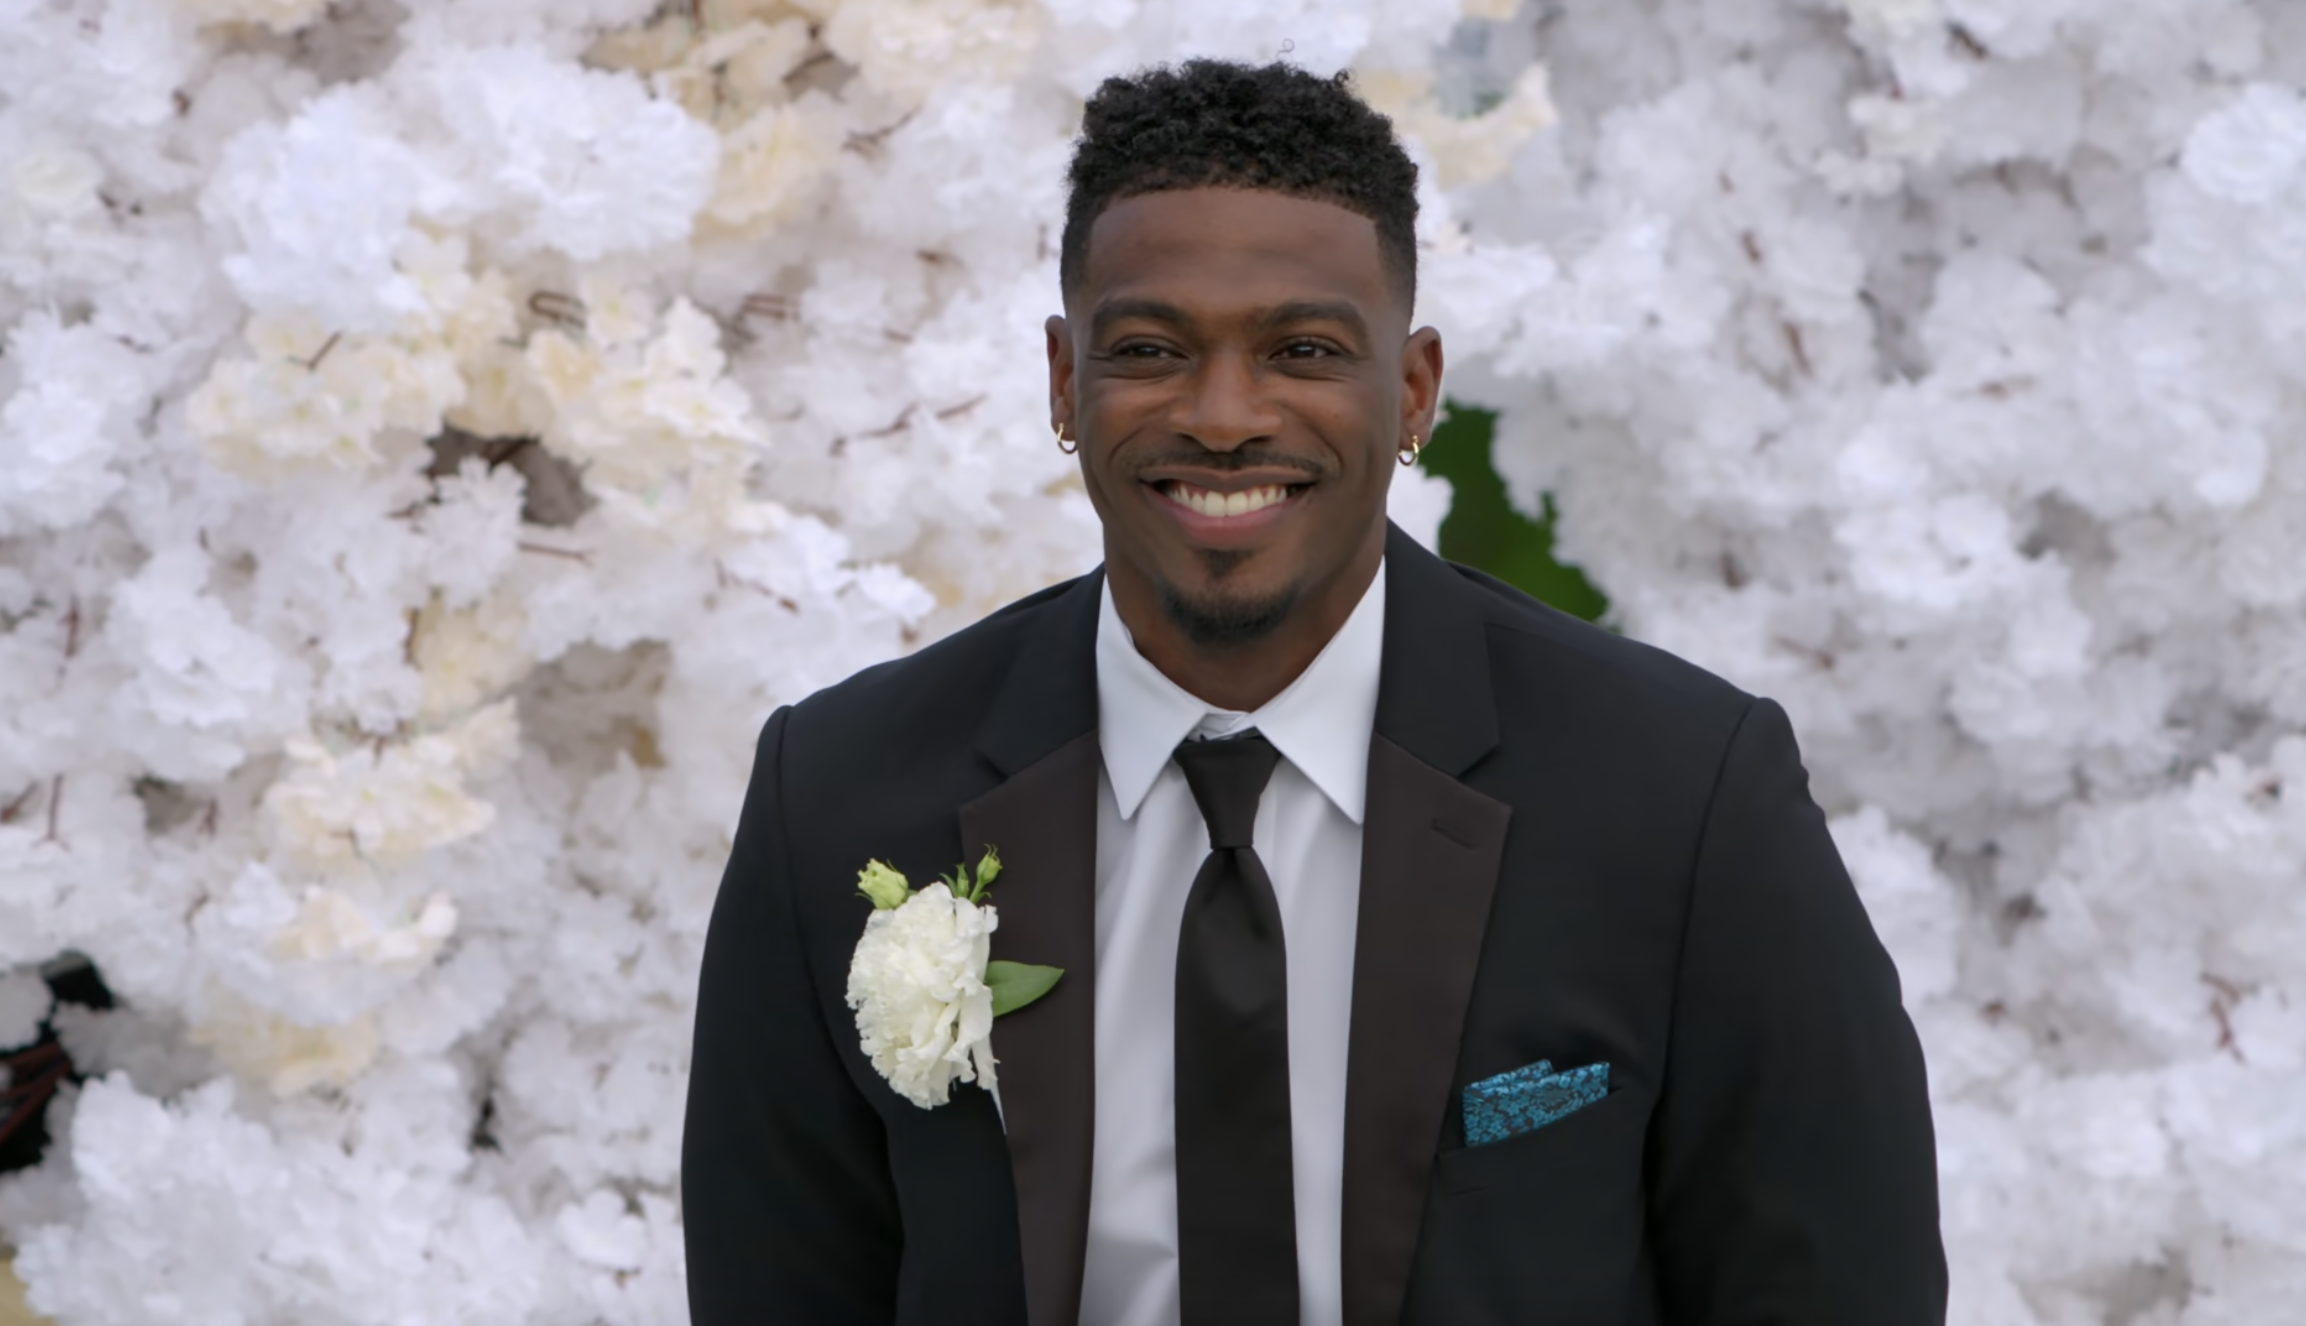 Clay smiling at the altar during his wedding